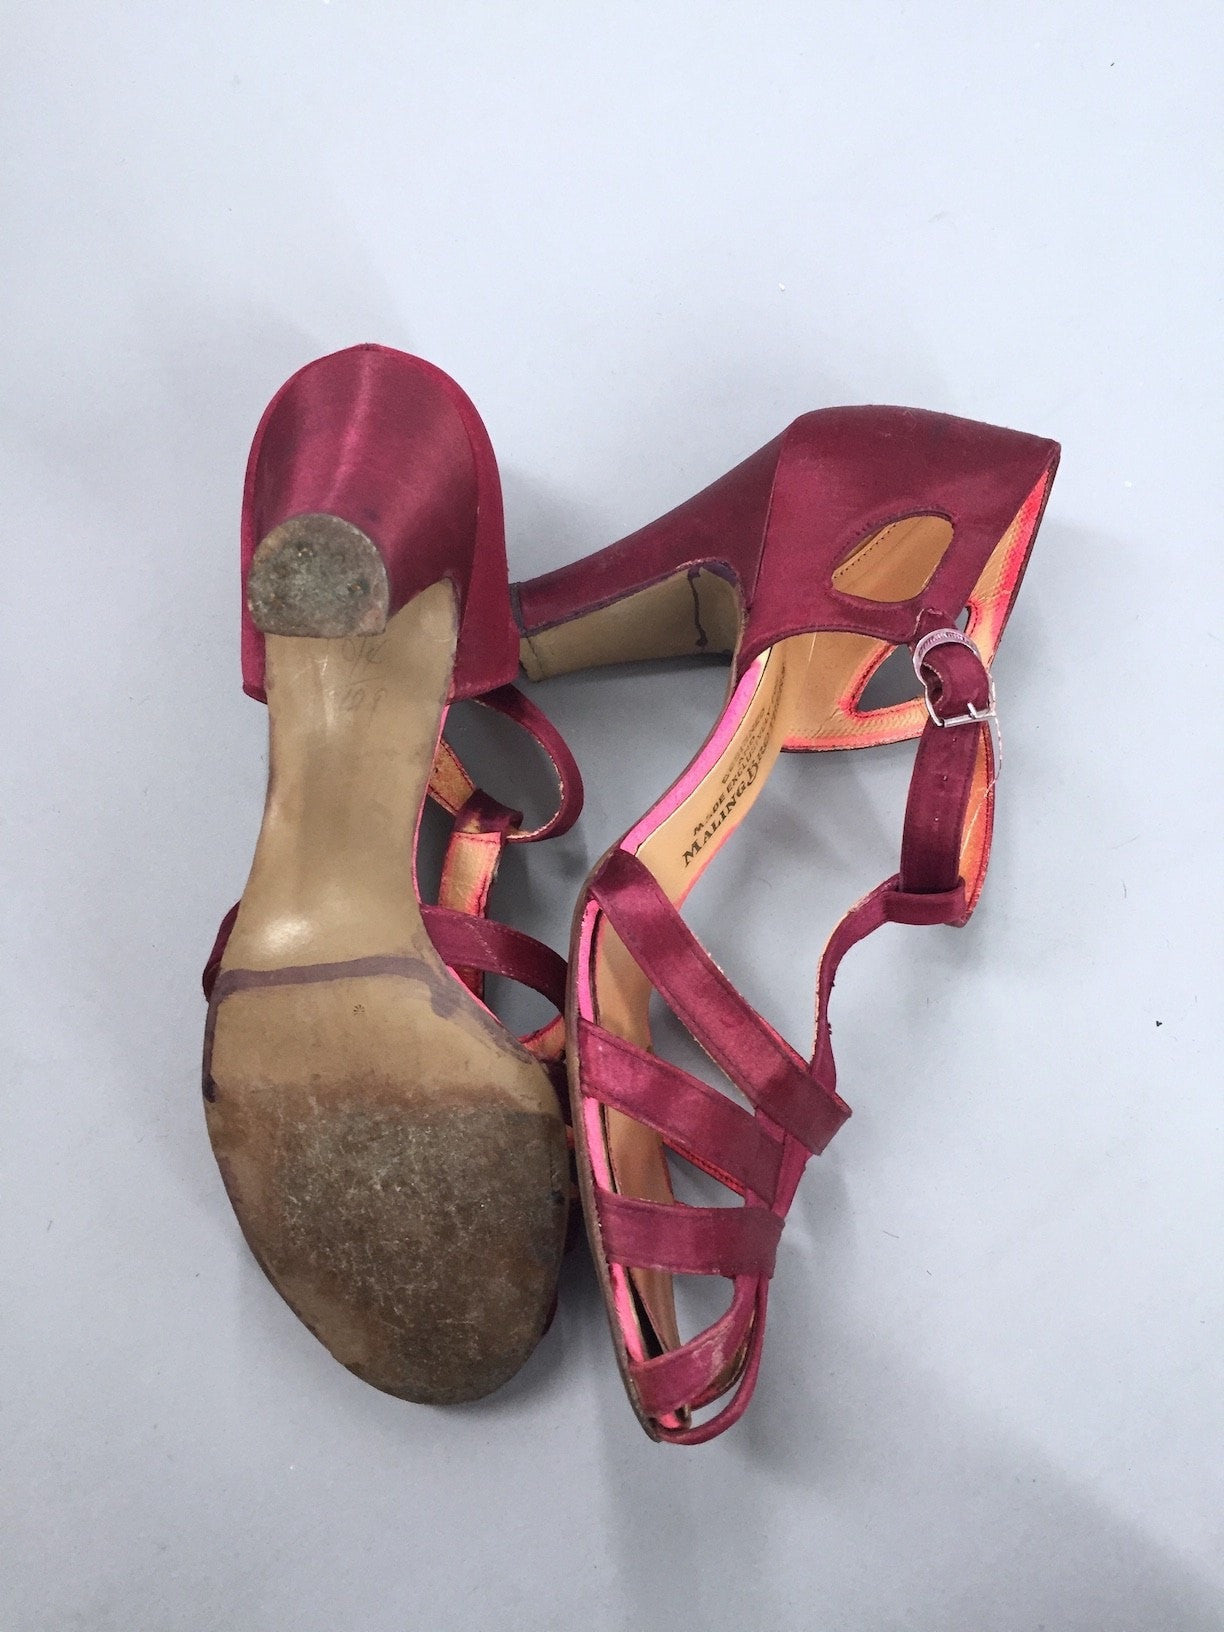 Vintage 1930s Shoes / Maling Brother's T-Strap Satin Dancing Heels - ThisBlueBird